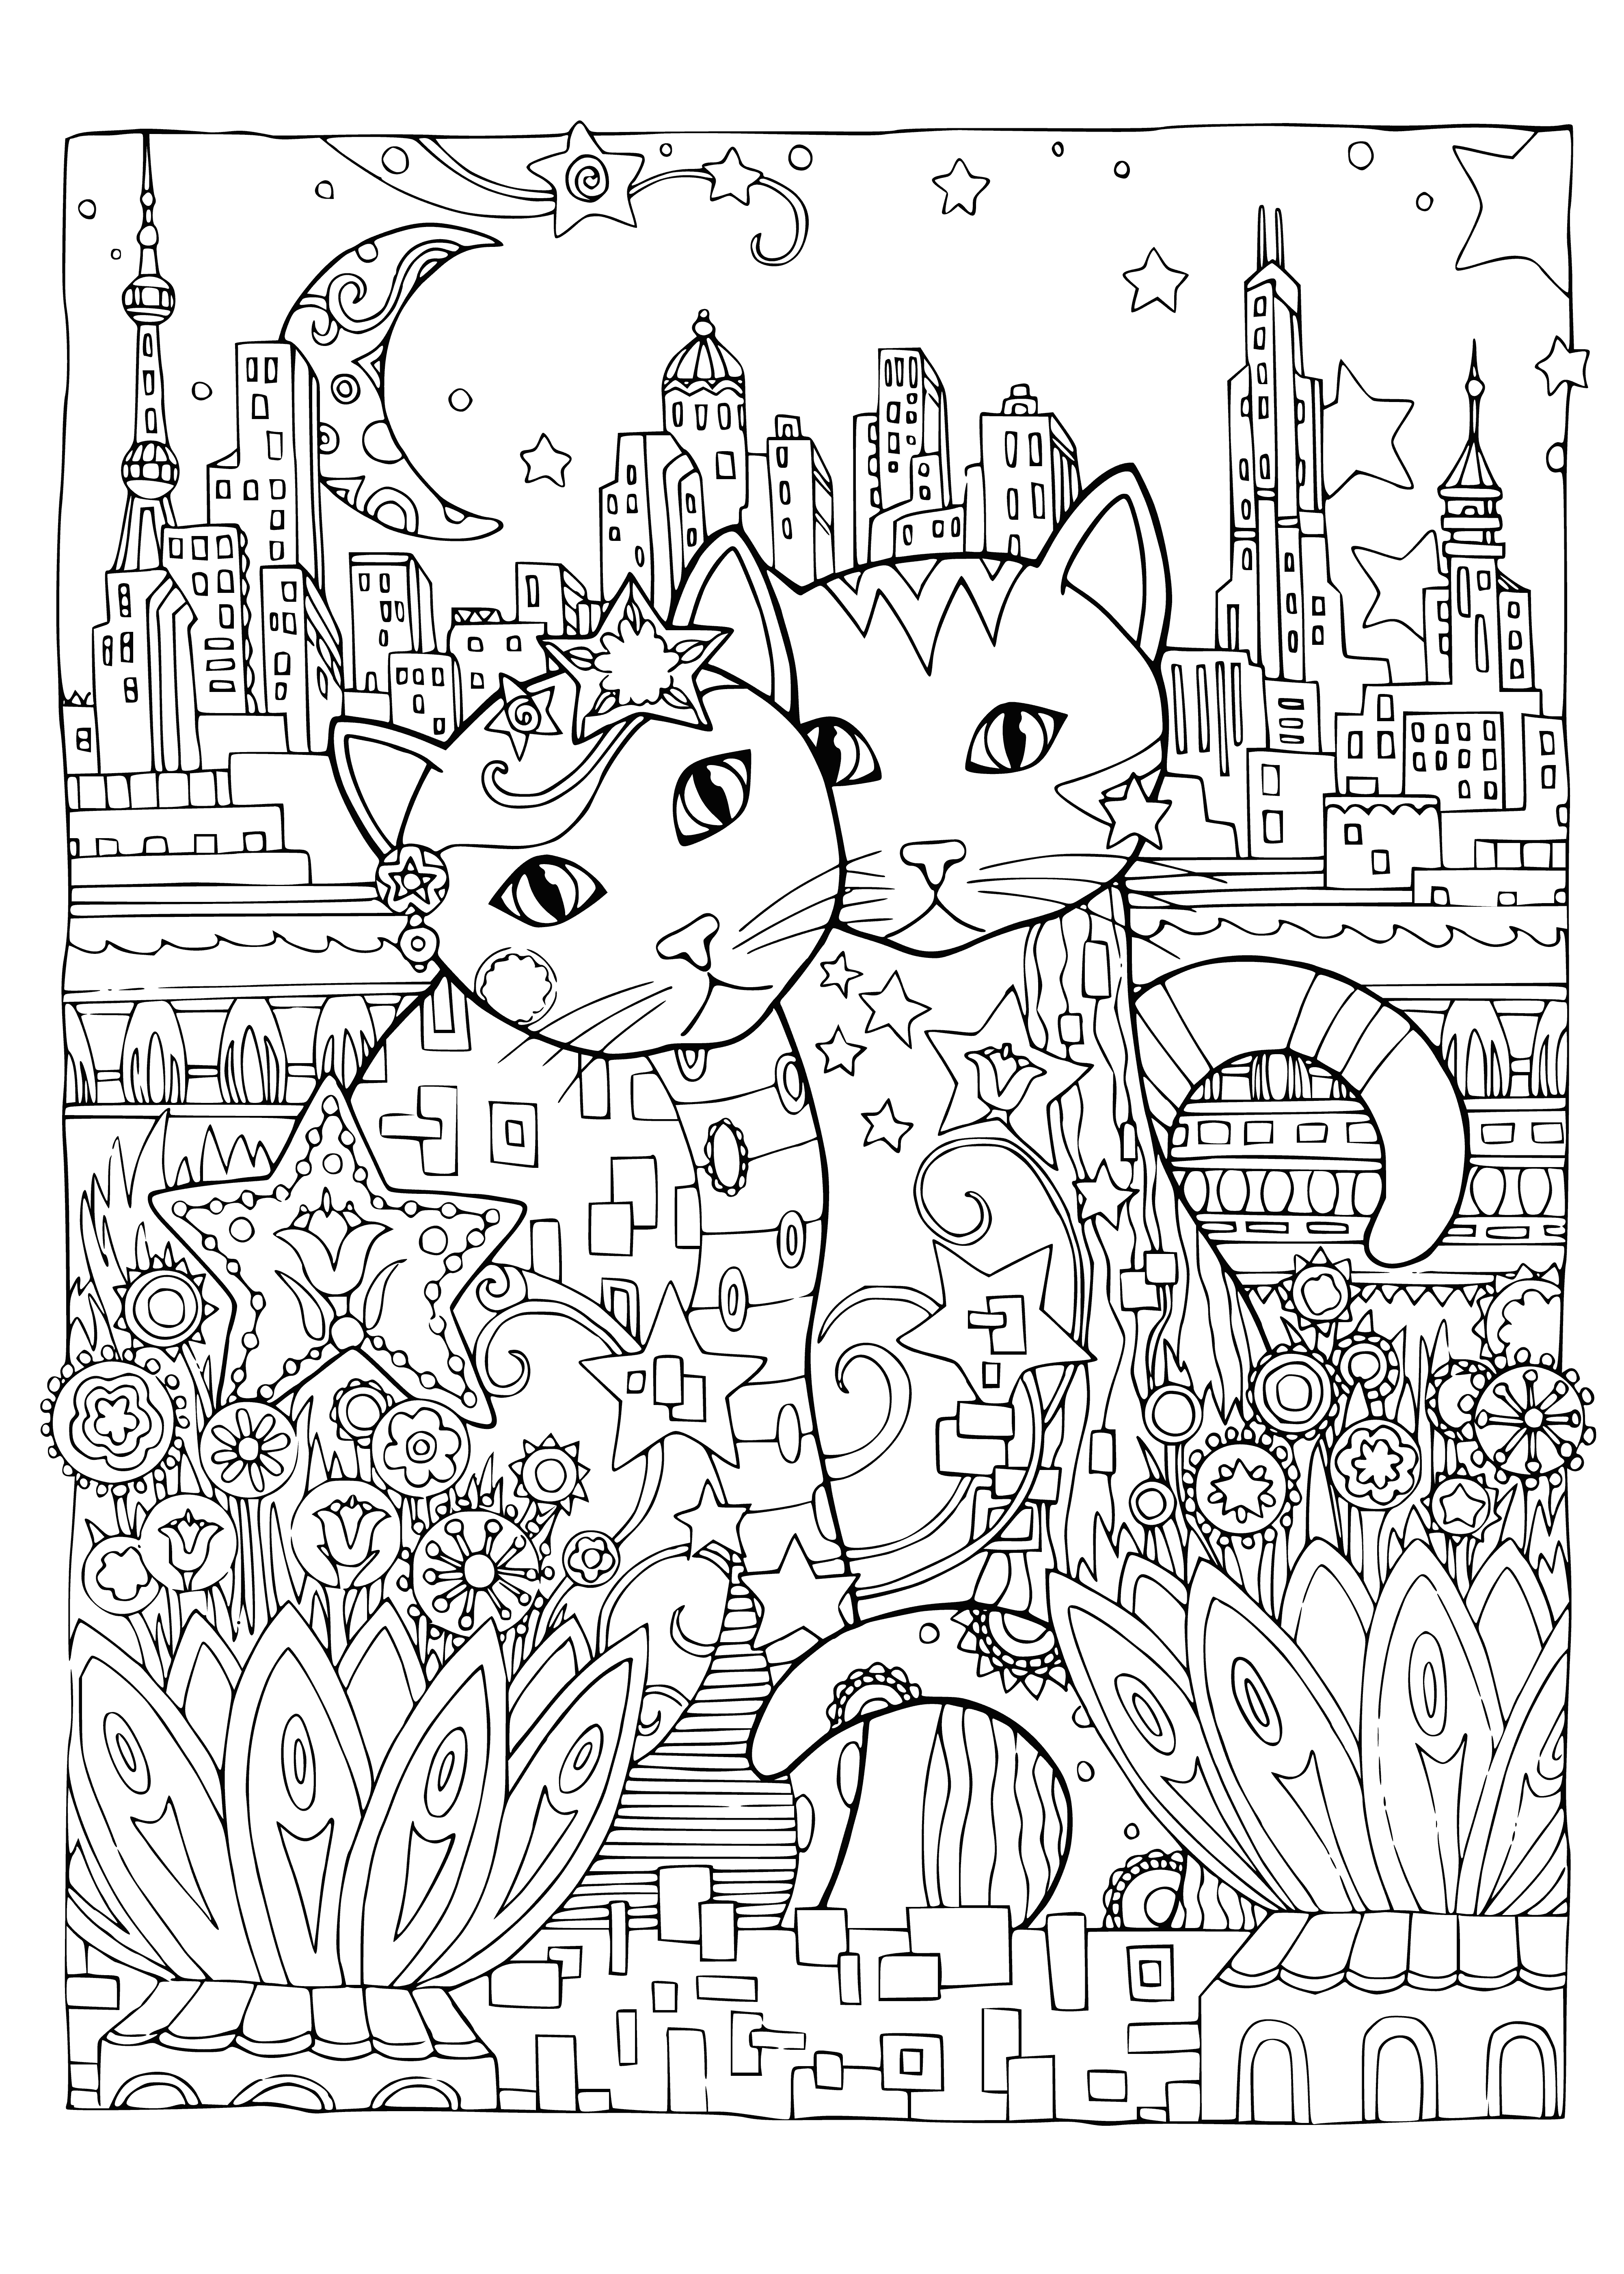 coloring page: Cats climb and explore a city; some lounge, chase or sleep on fire escapes.